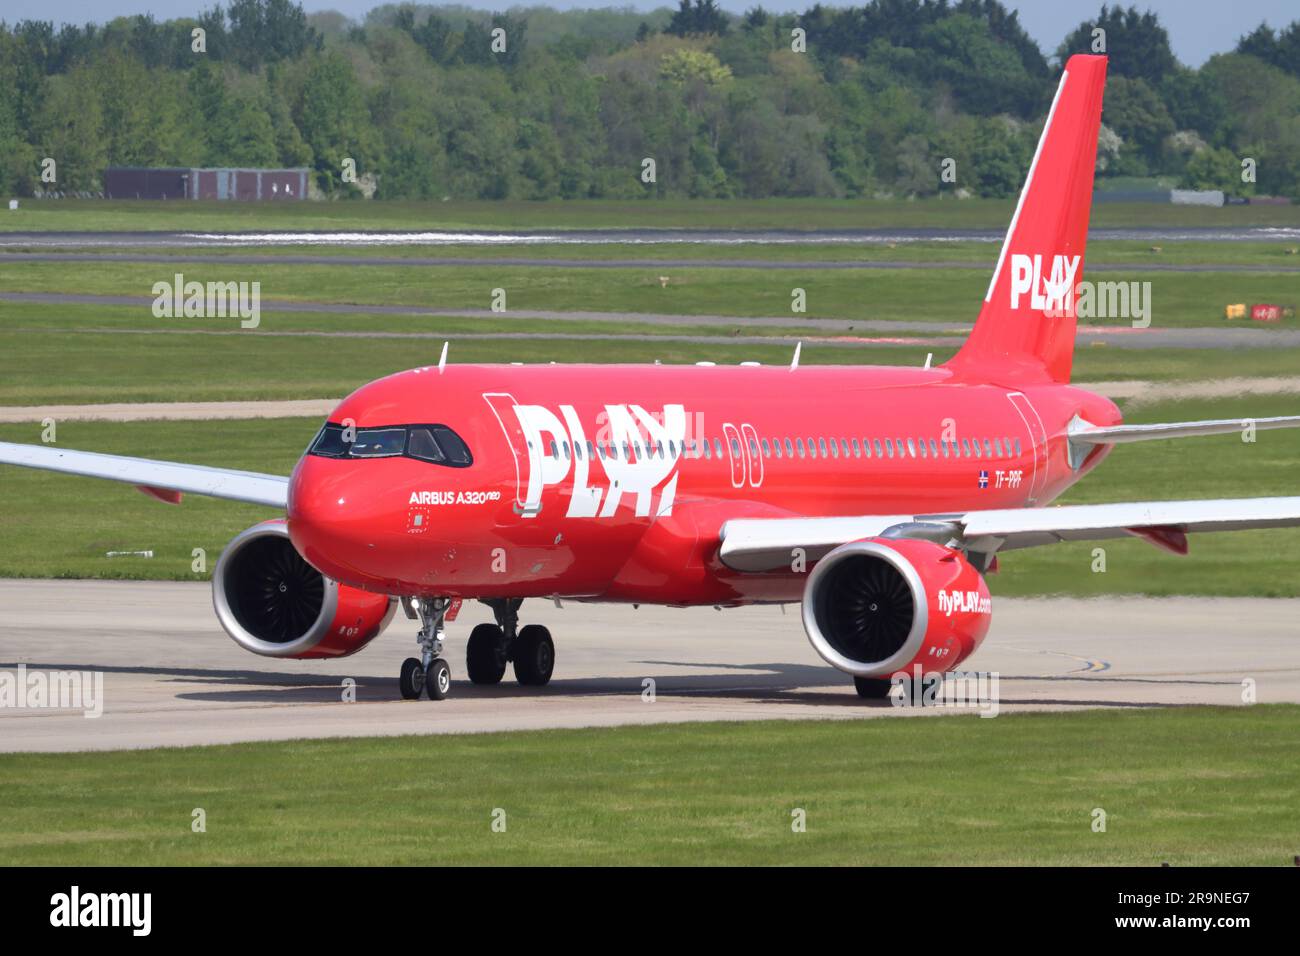 Play Airlines, Airbus A320 Neo TF-PPF, departs Stansted Airport, Essex, UK Stock Photo